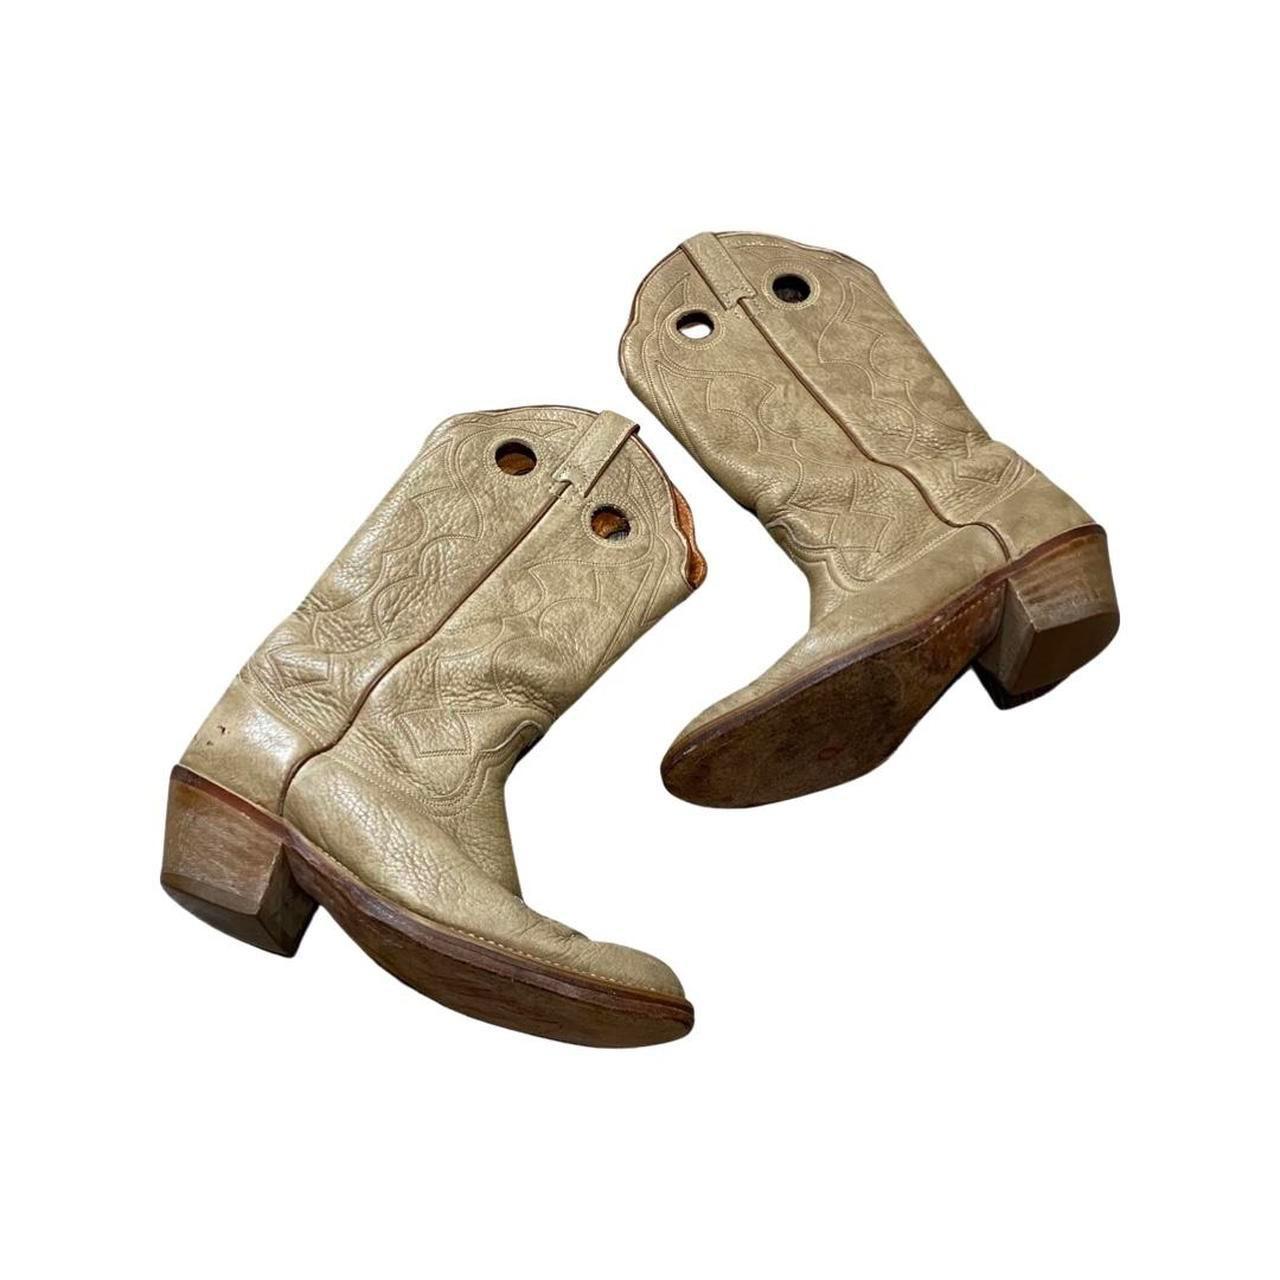 Product Image 1 - VINTAGE CREAM COWBOY BOOTS

-80s
-MADE IN